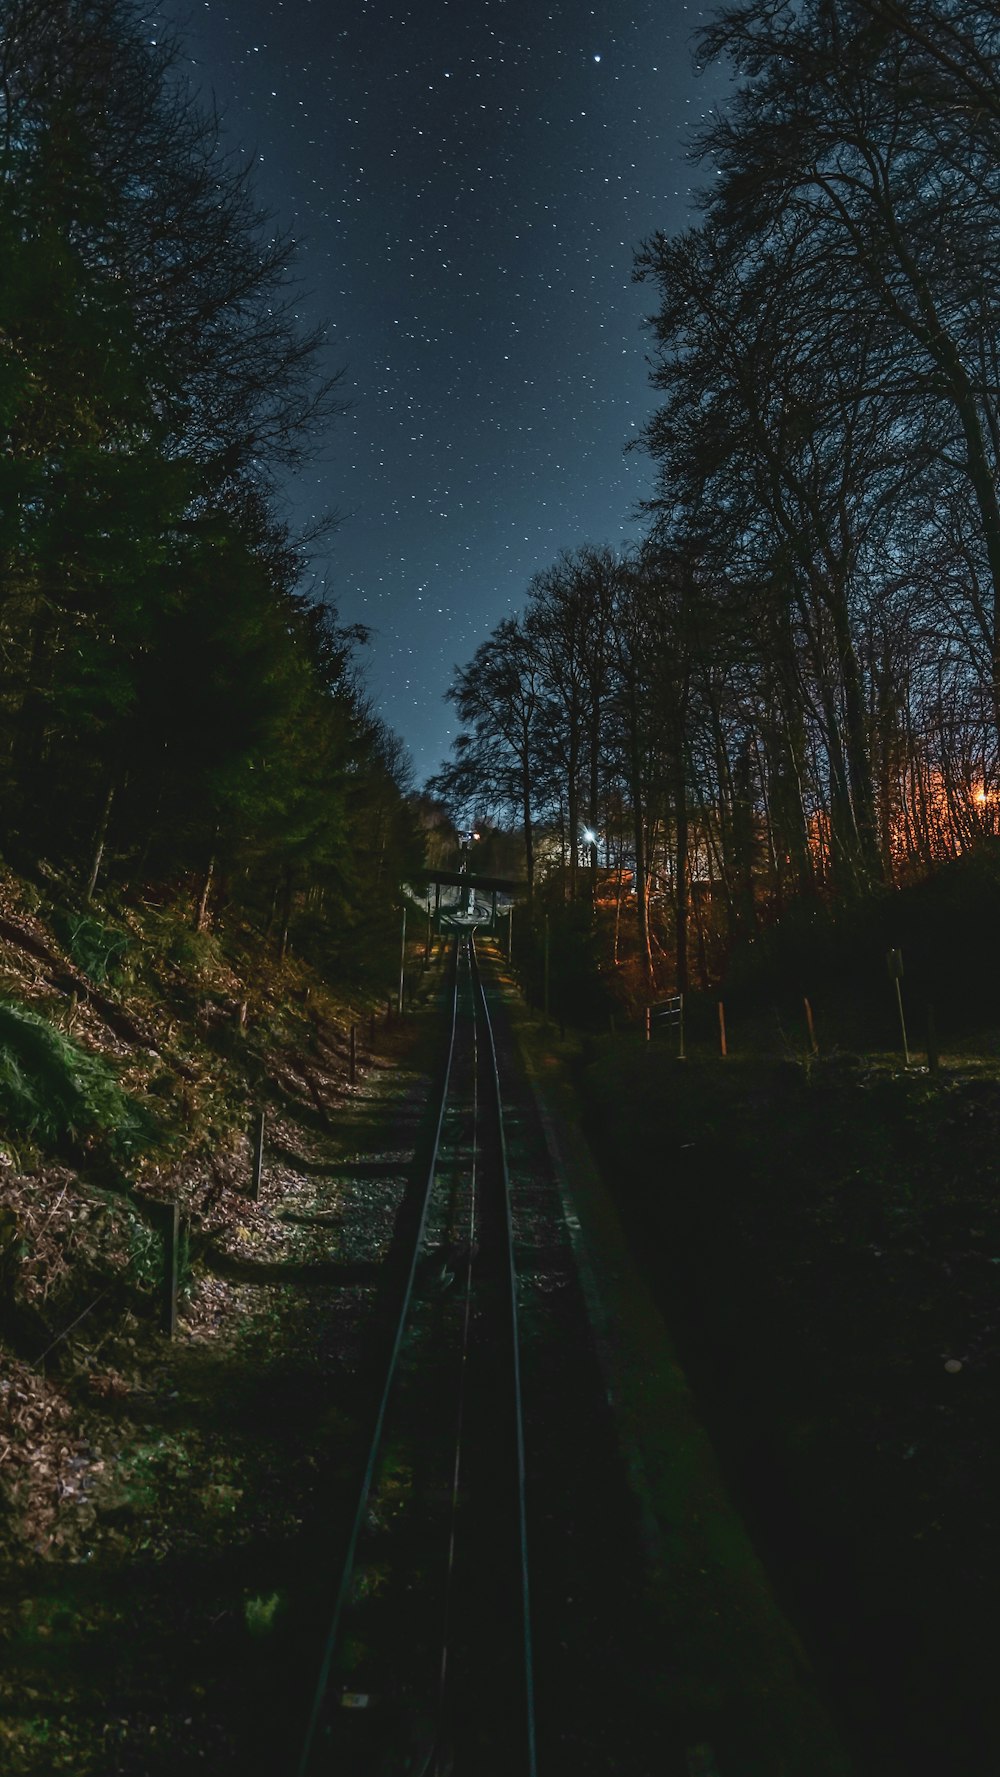 a train track under a night sky with stars